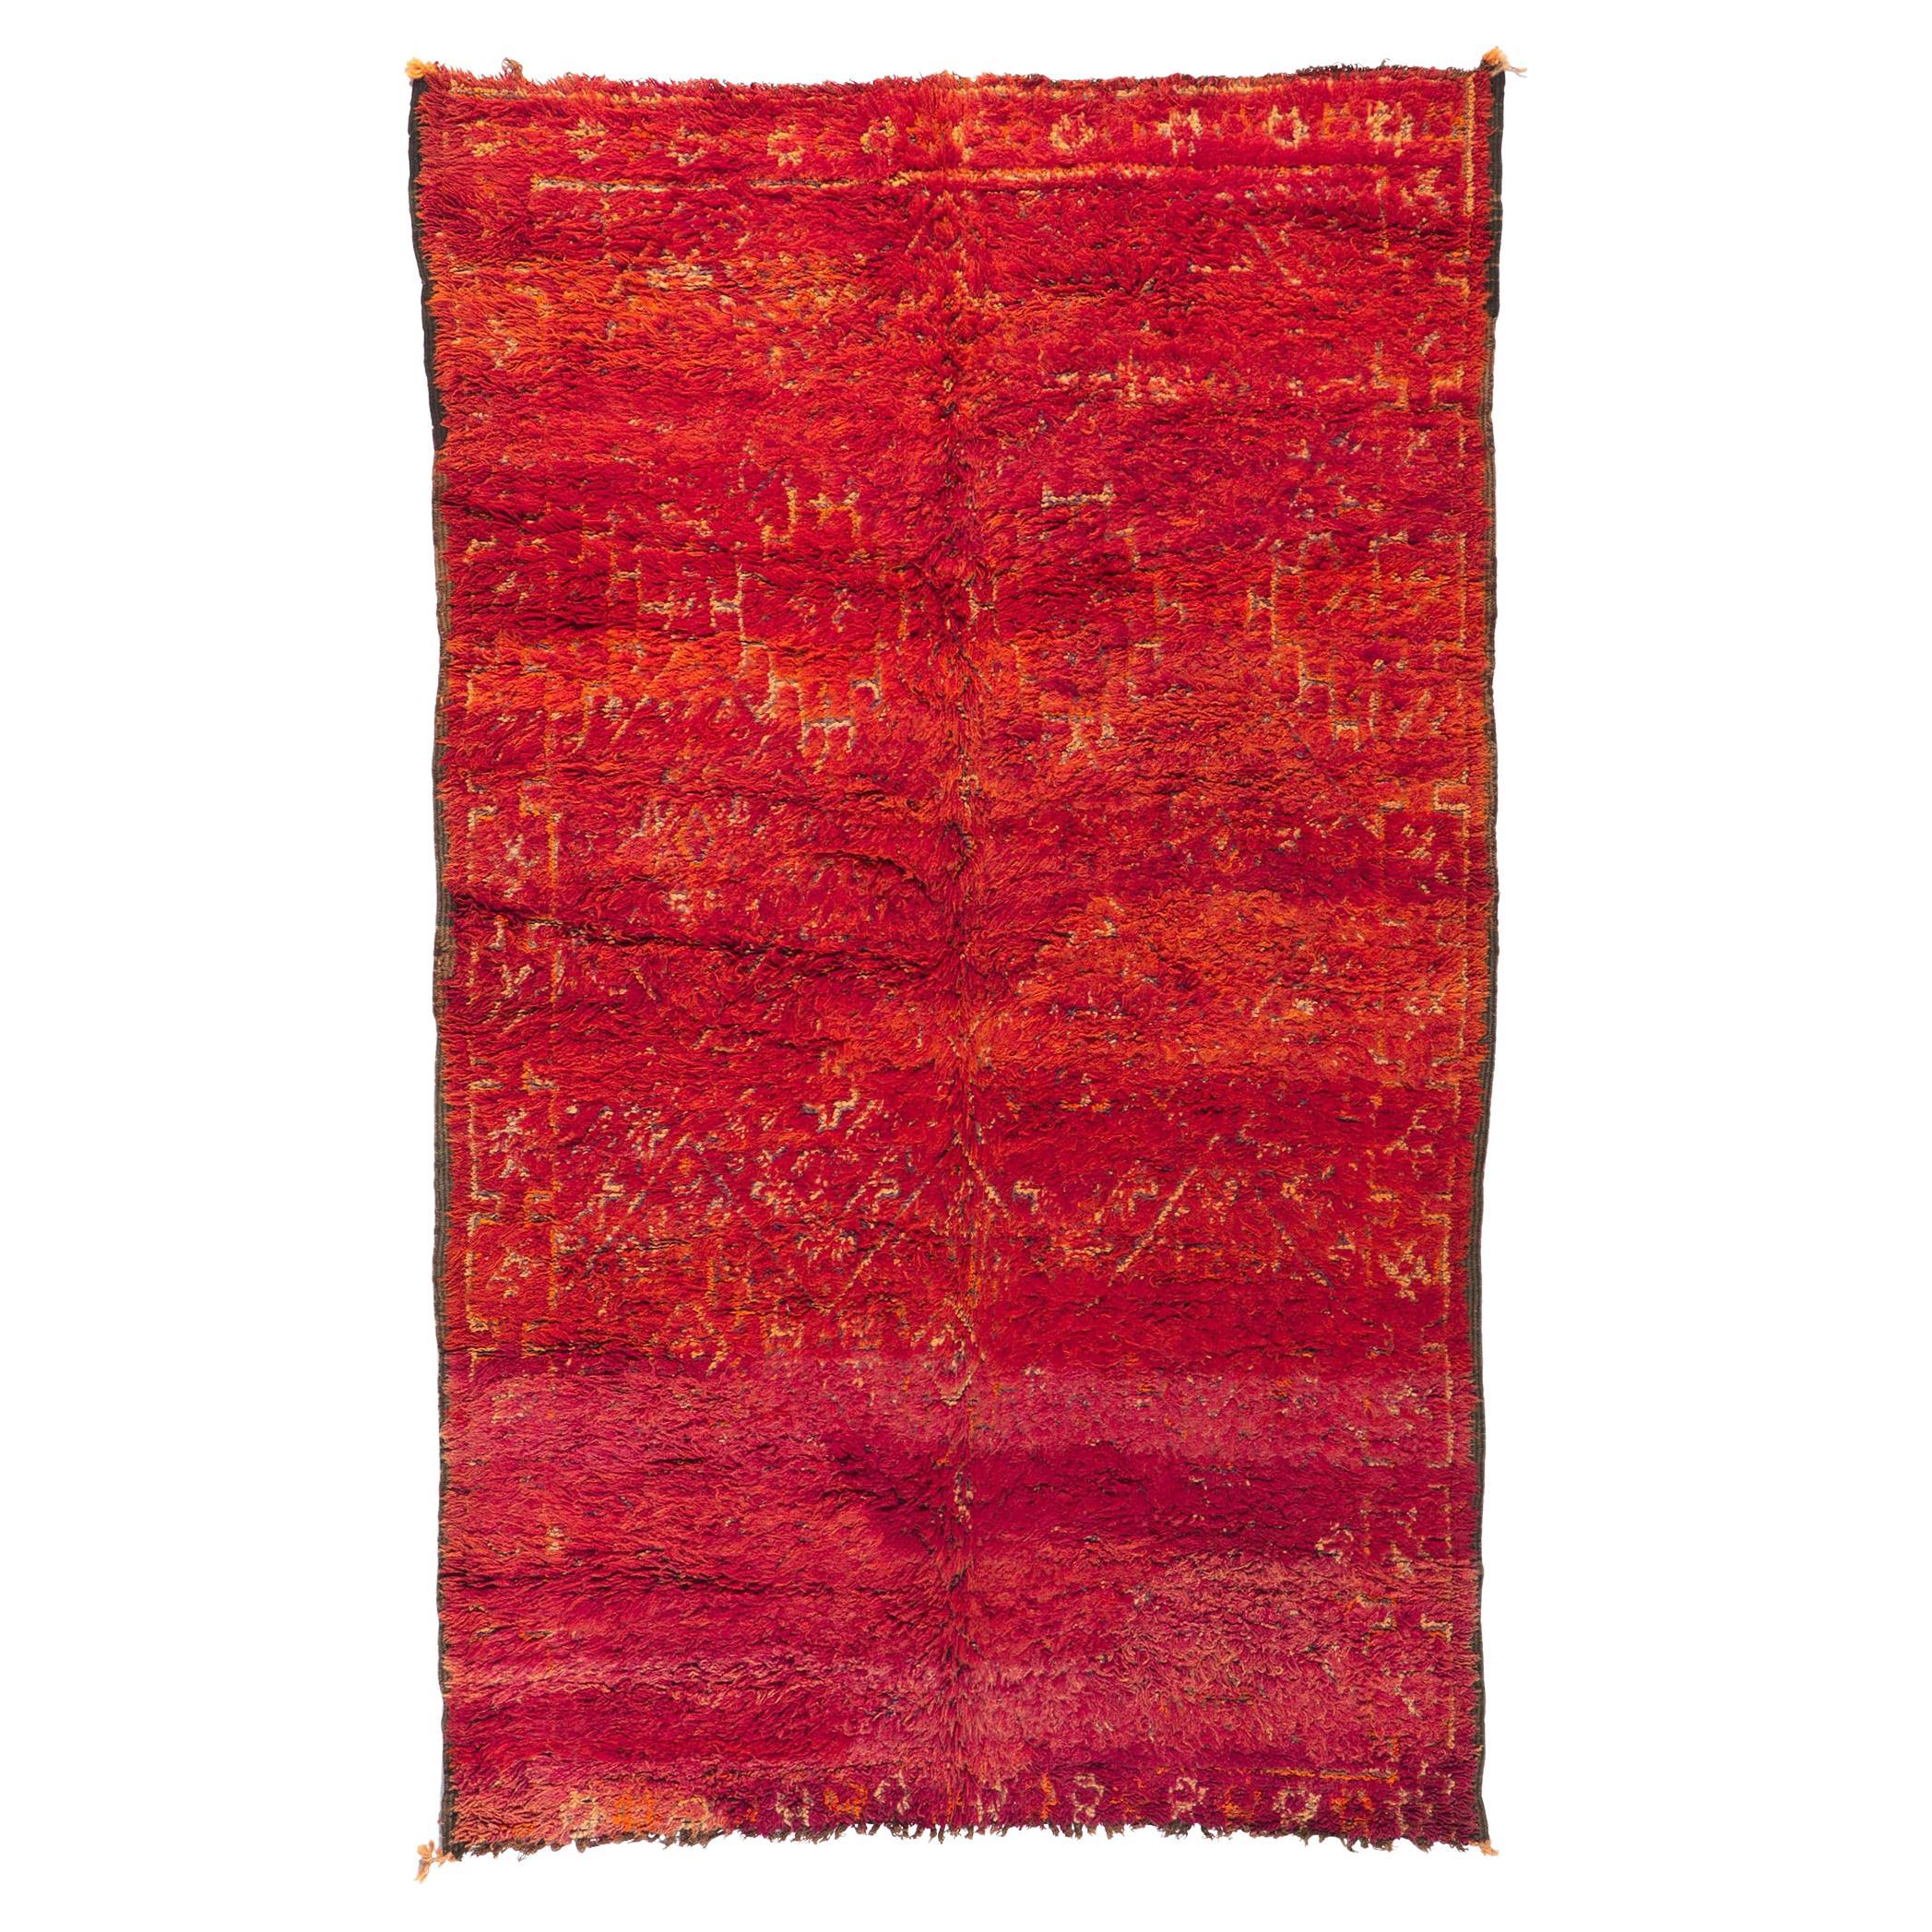 Vintage Red Beni MGuild Moroccan Rug, Maximalist Style Meets Cozy Nomad